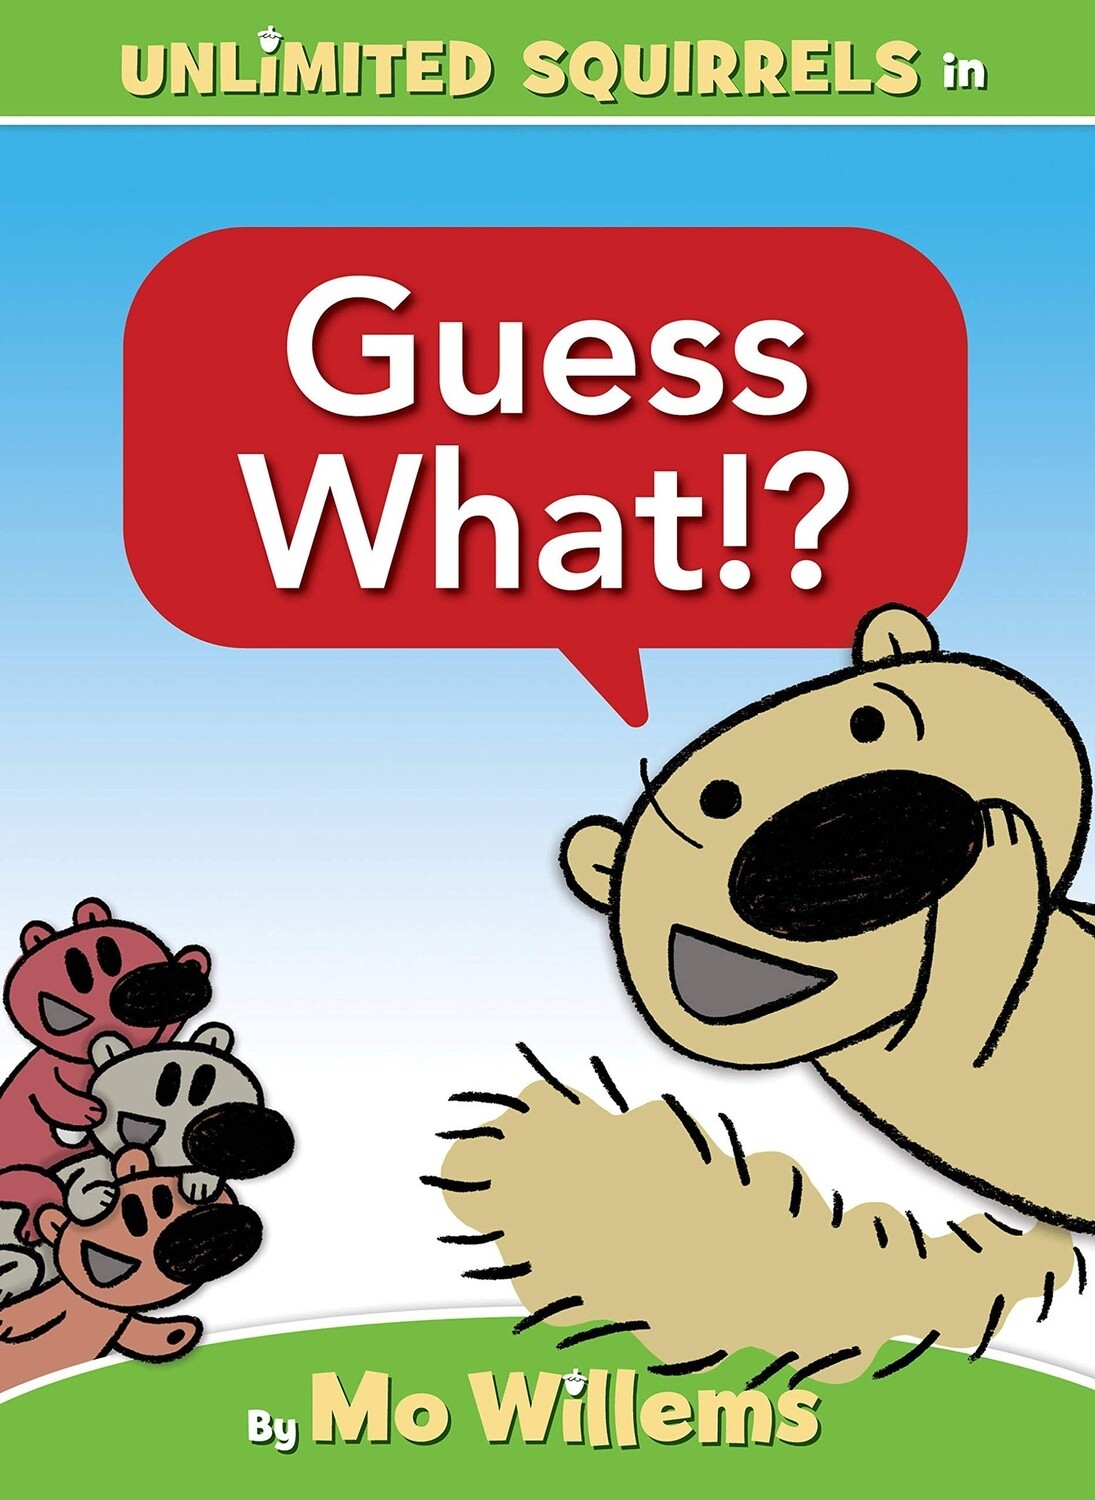 Mo Willems Guess What!? (An Unlimited Squirrels Book)